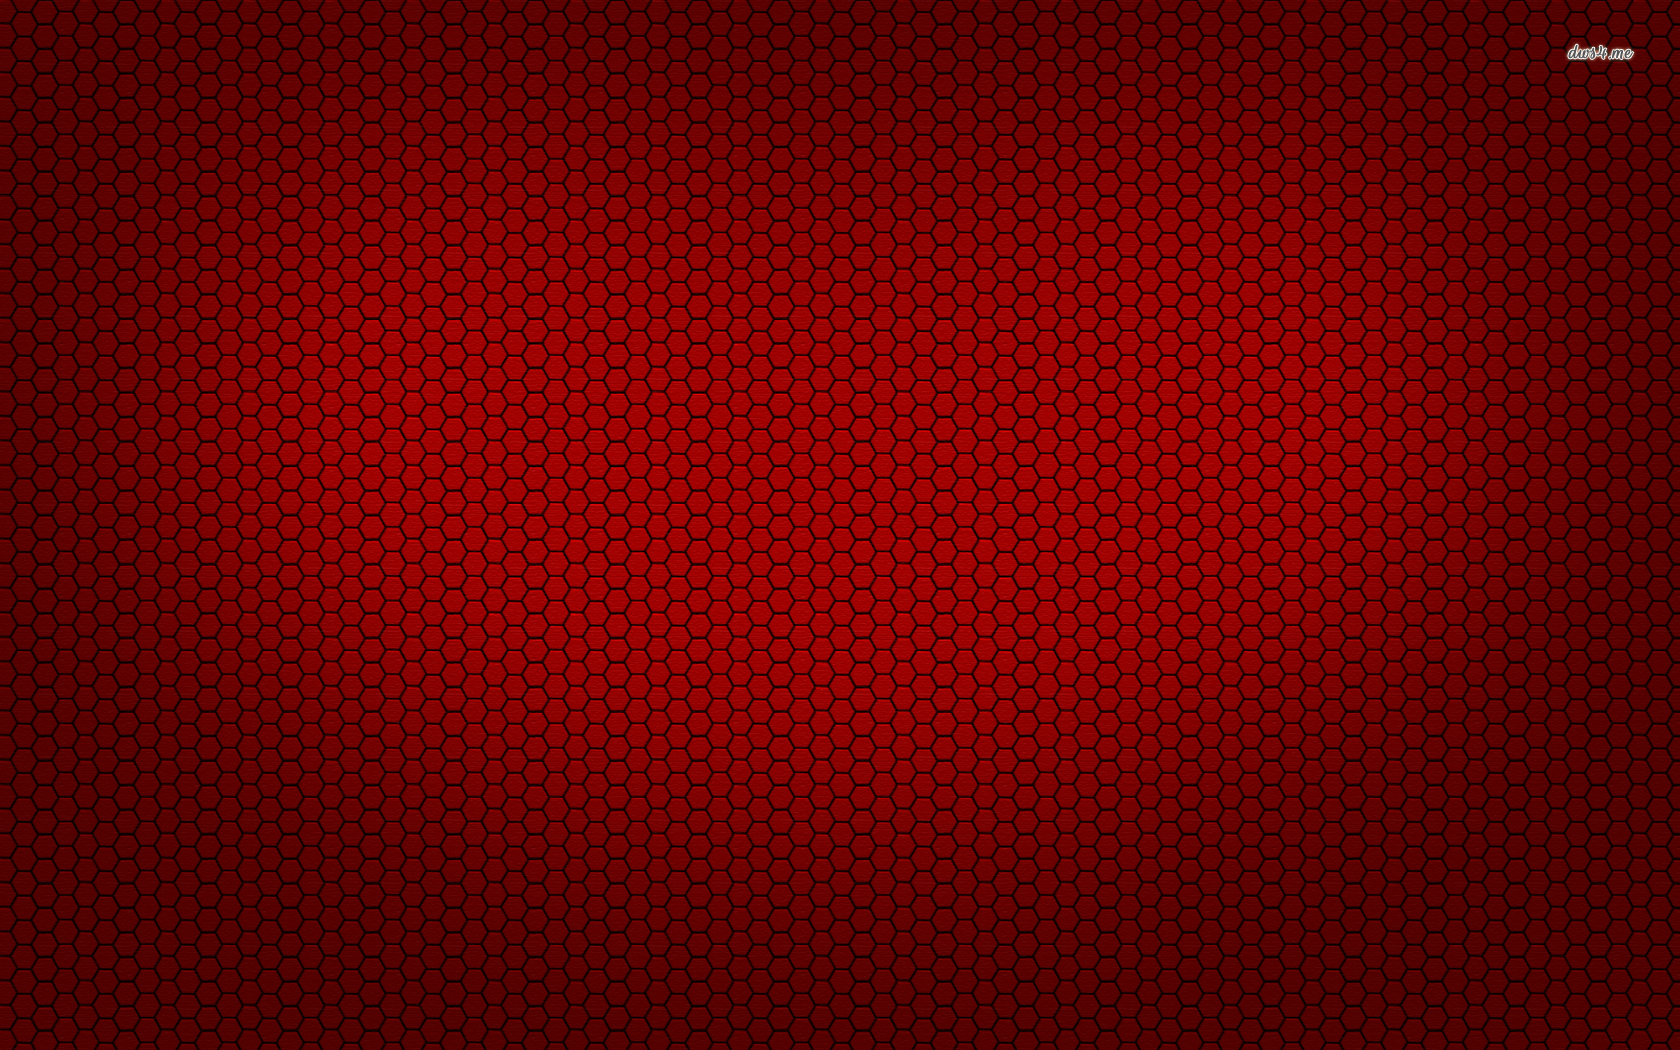 Red Honeyb Pattern Wallpaper Abstract